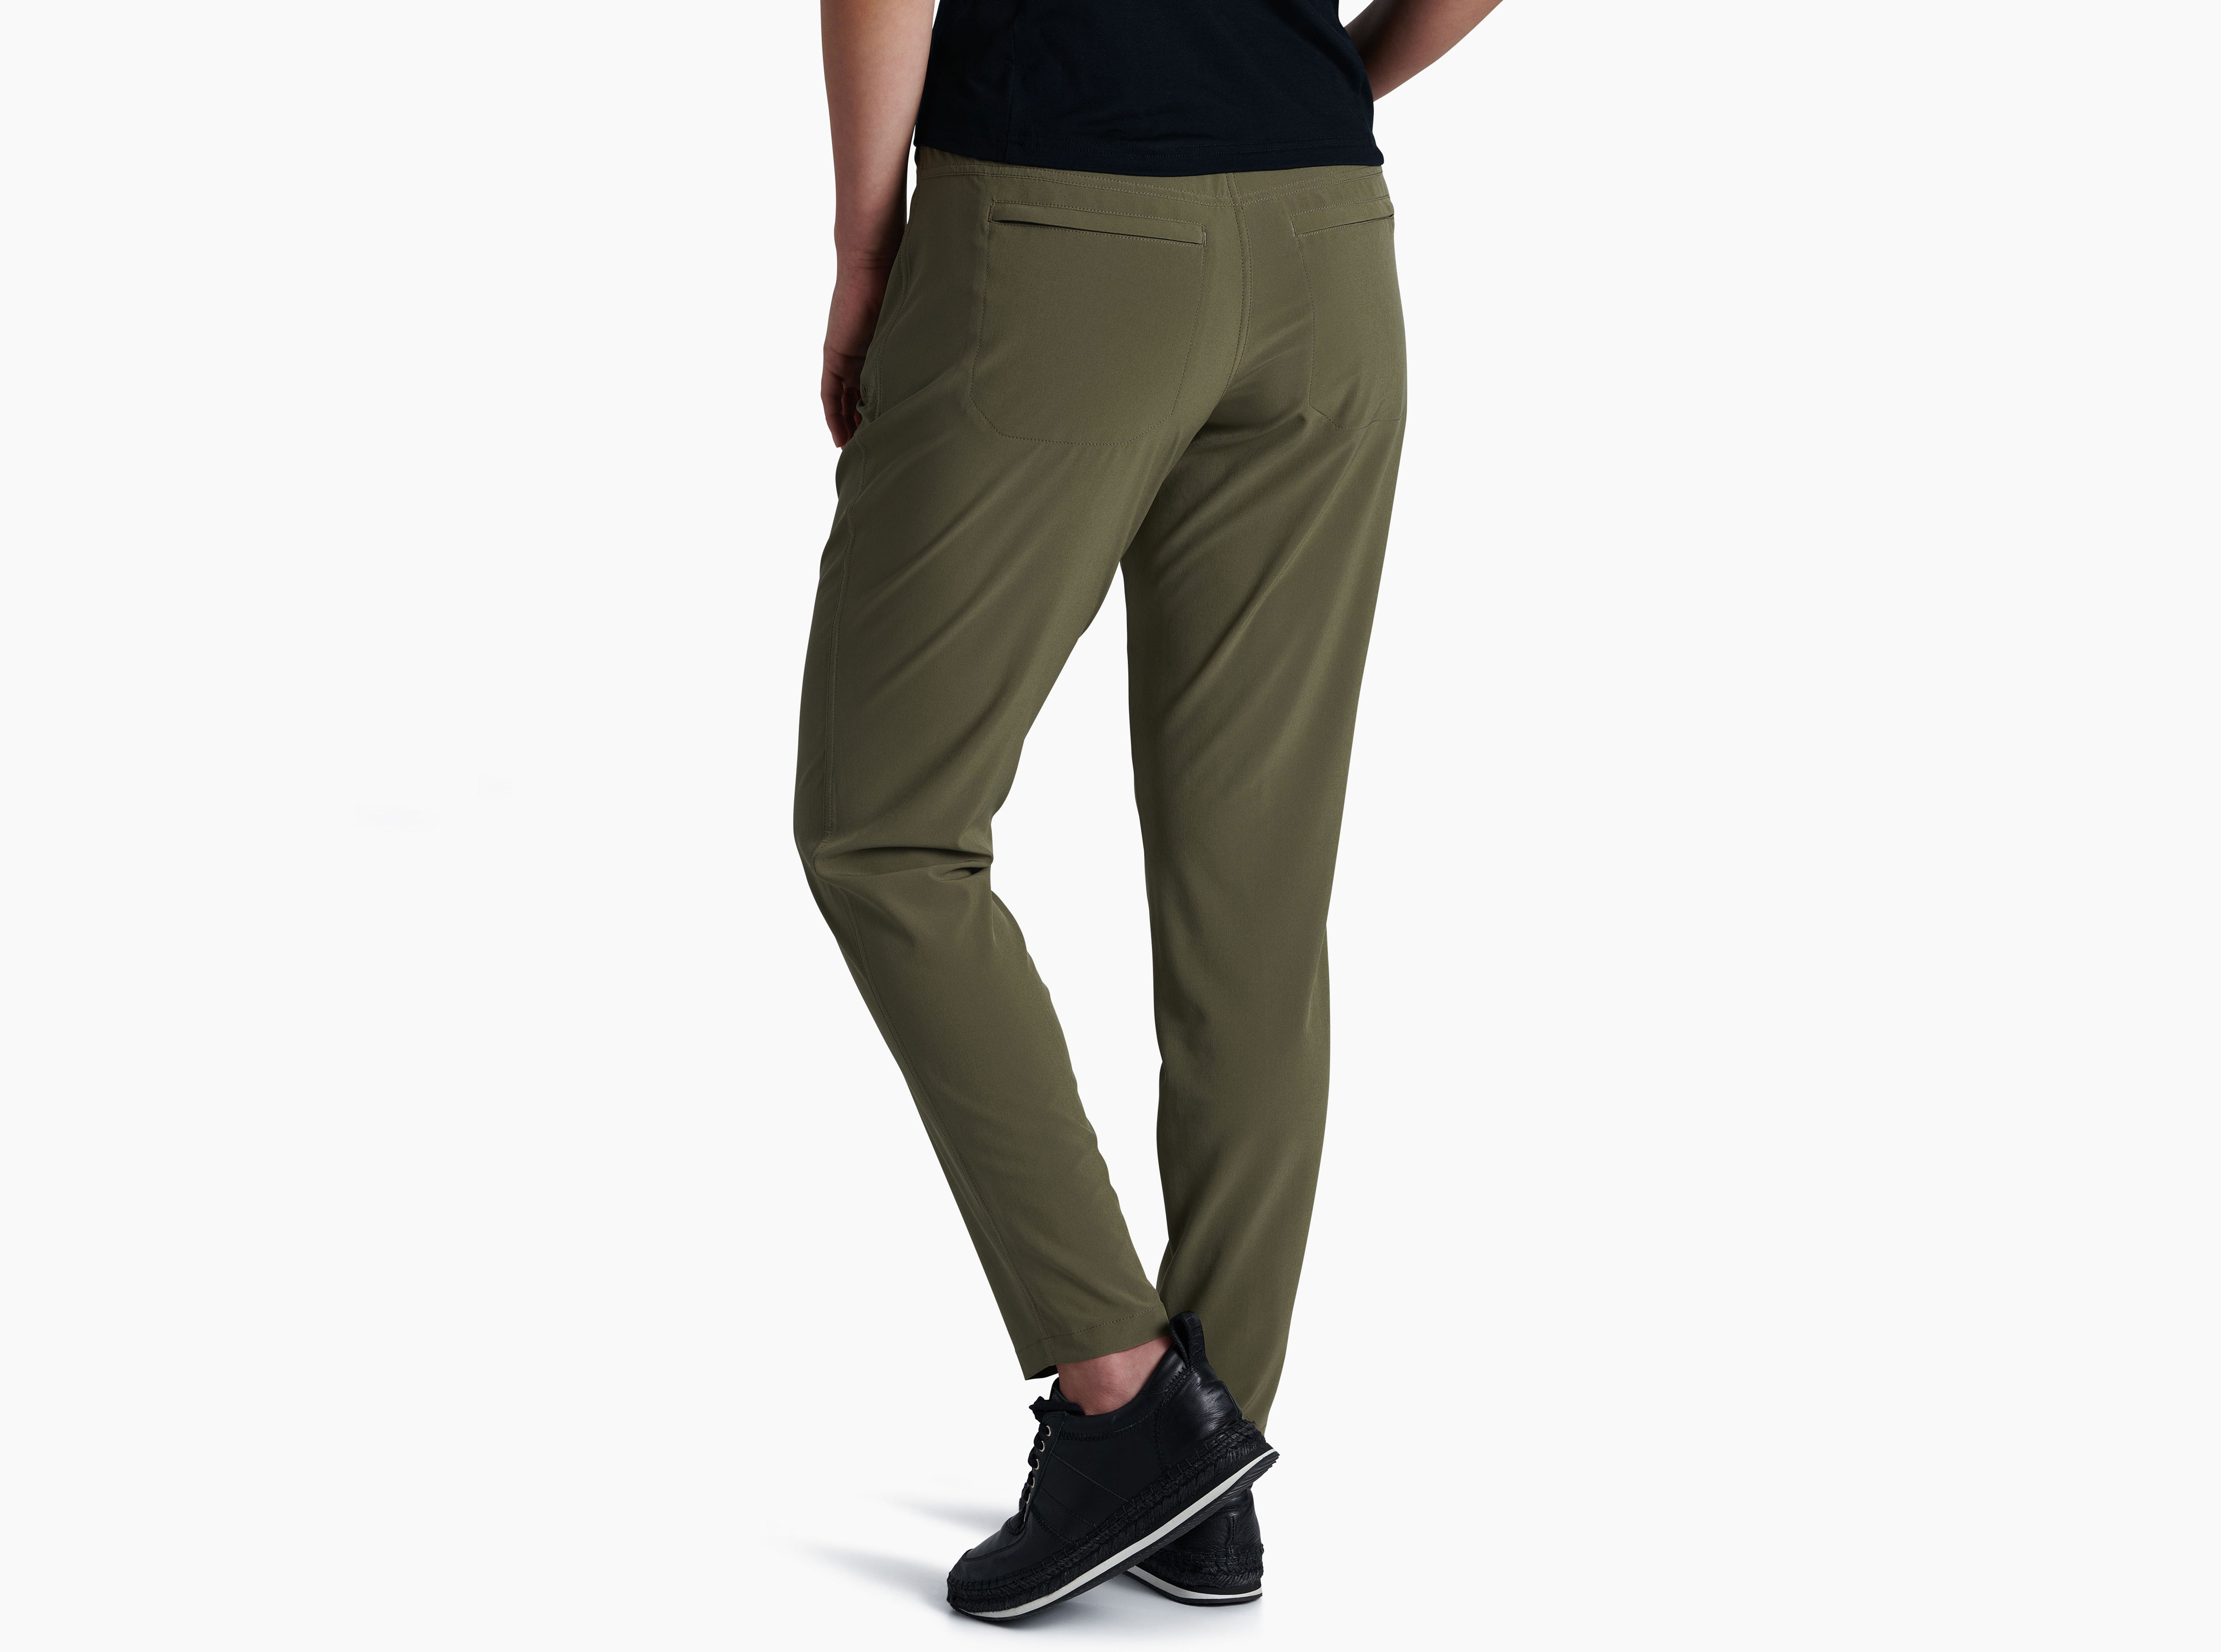 Kuhl Mova Pants, 34 In. Inseam, Pants, Clothing & Accessories